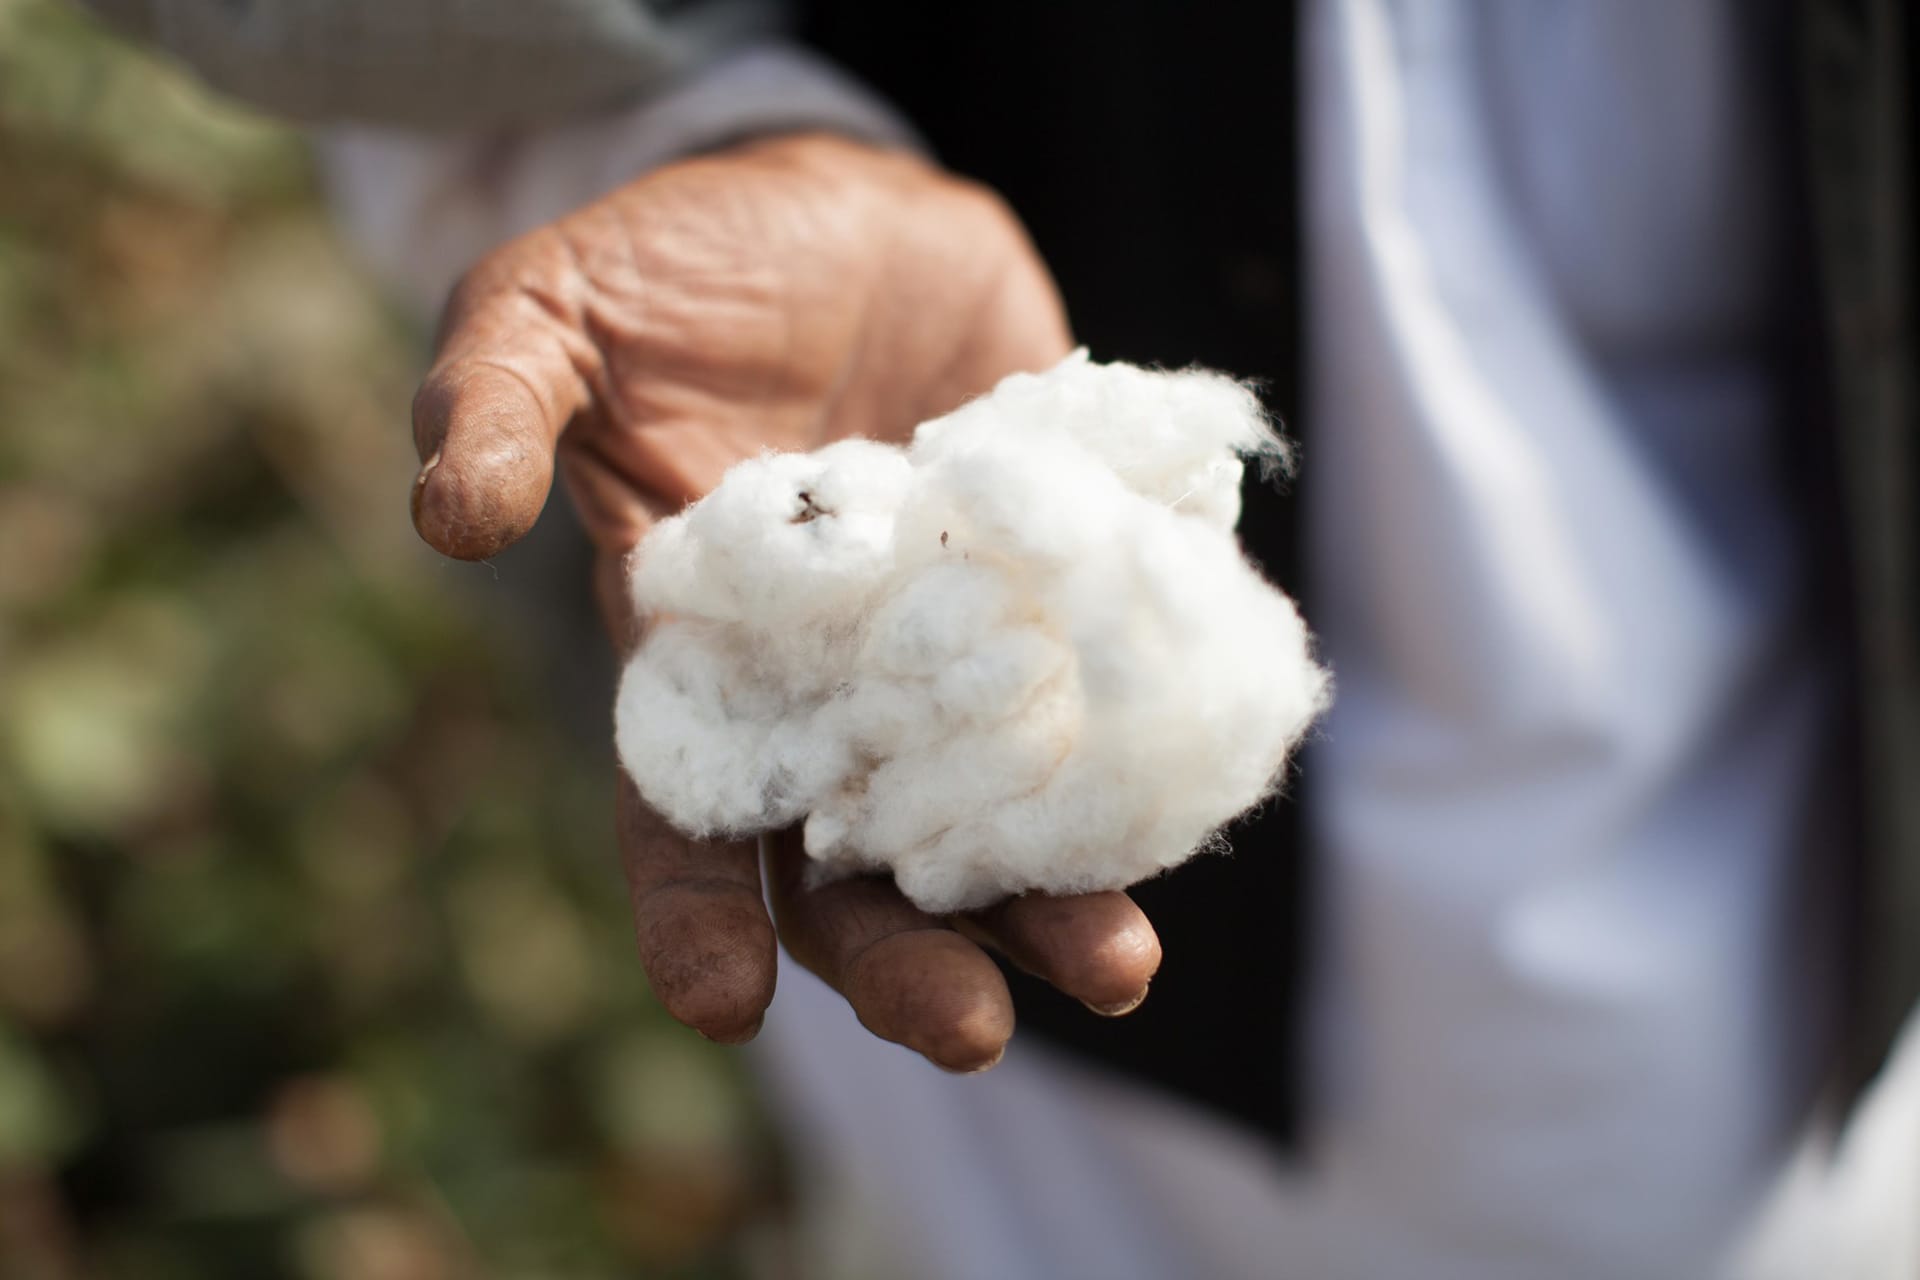 A cotton farmer holds a handful of raw cotton in Rapar district, Gujarat, India.